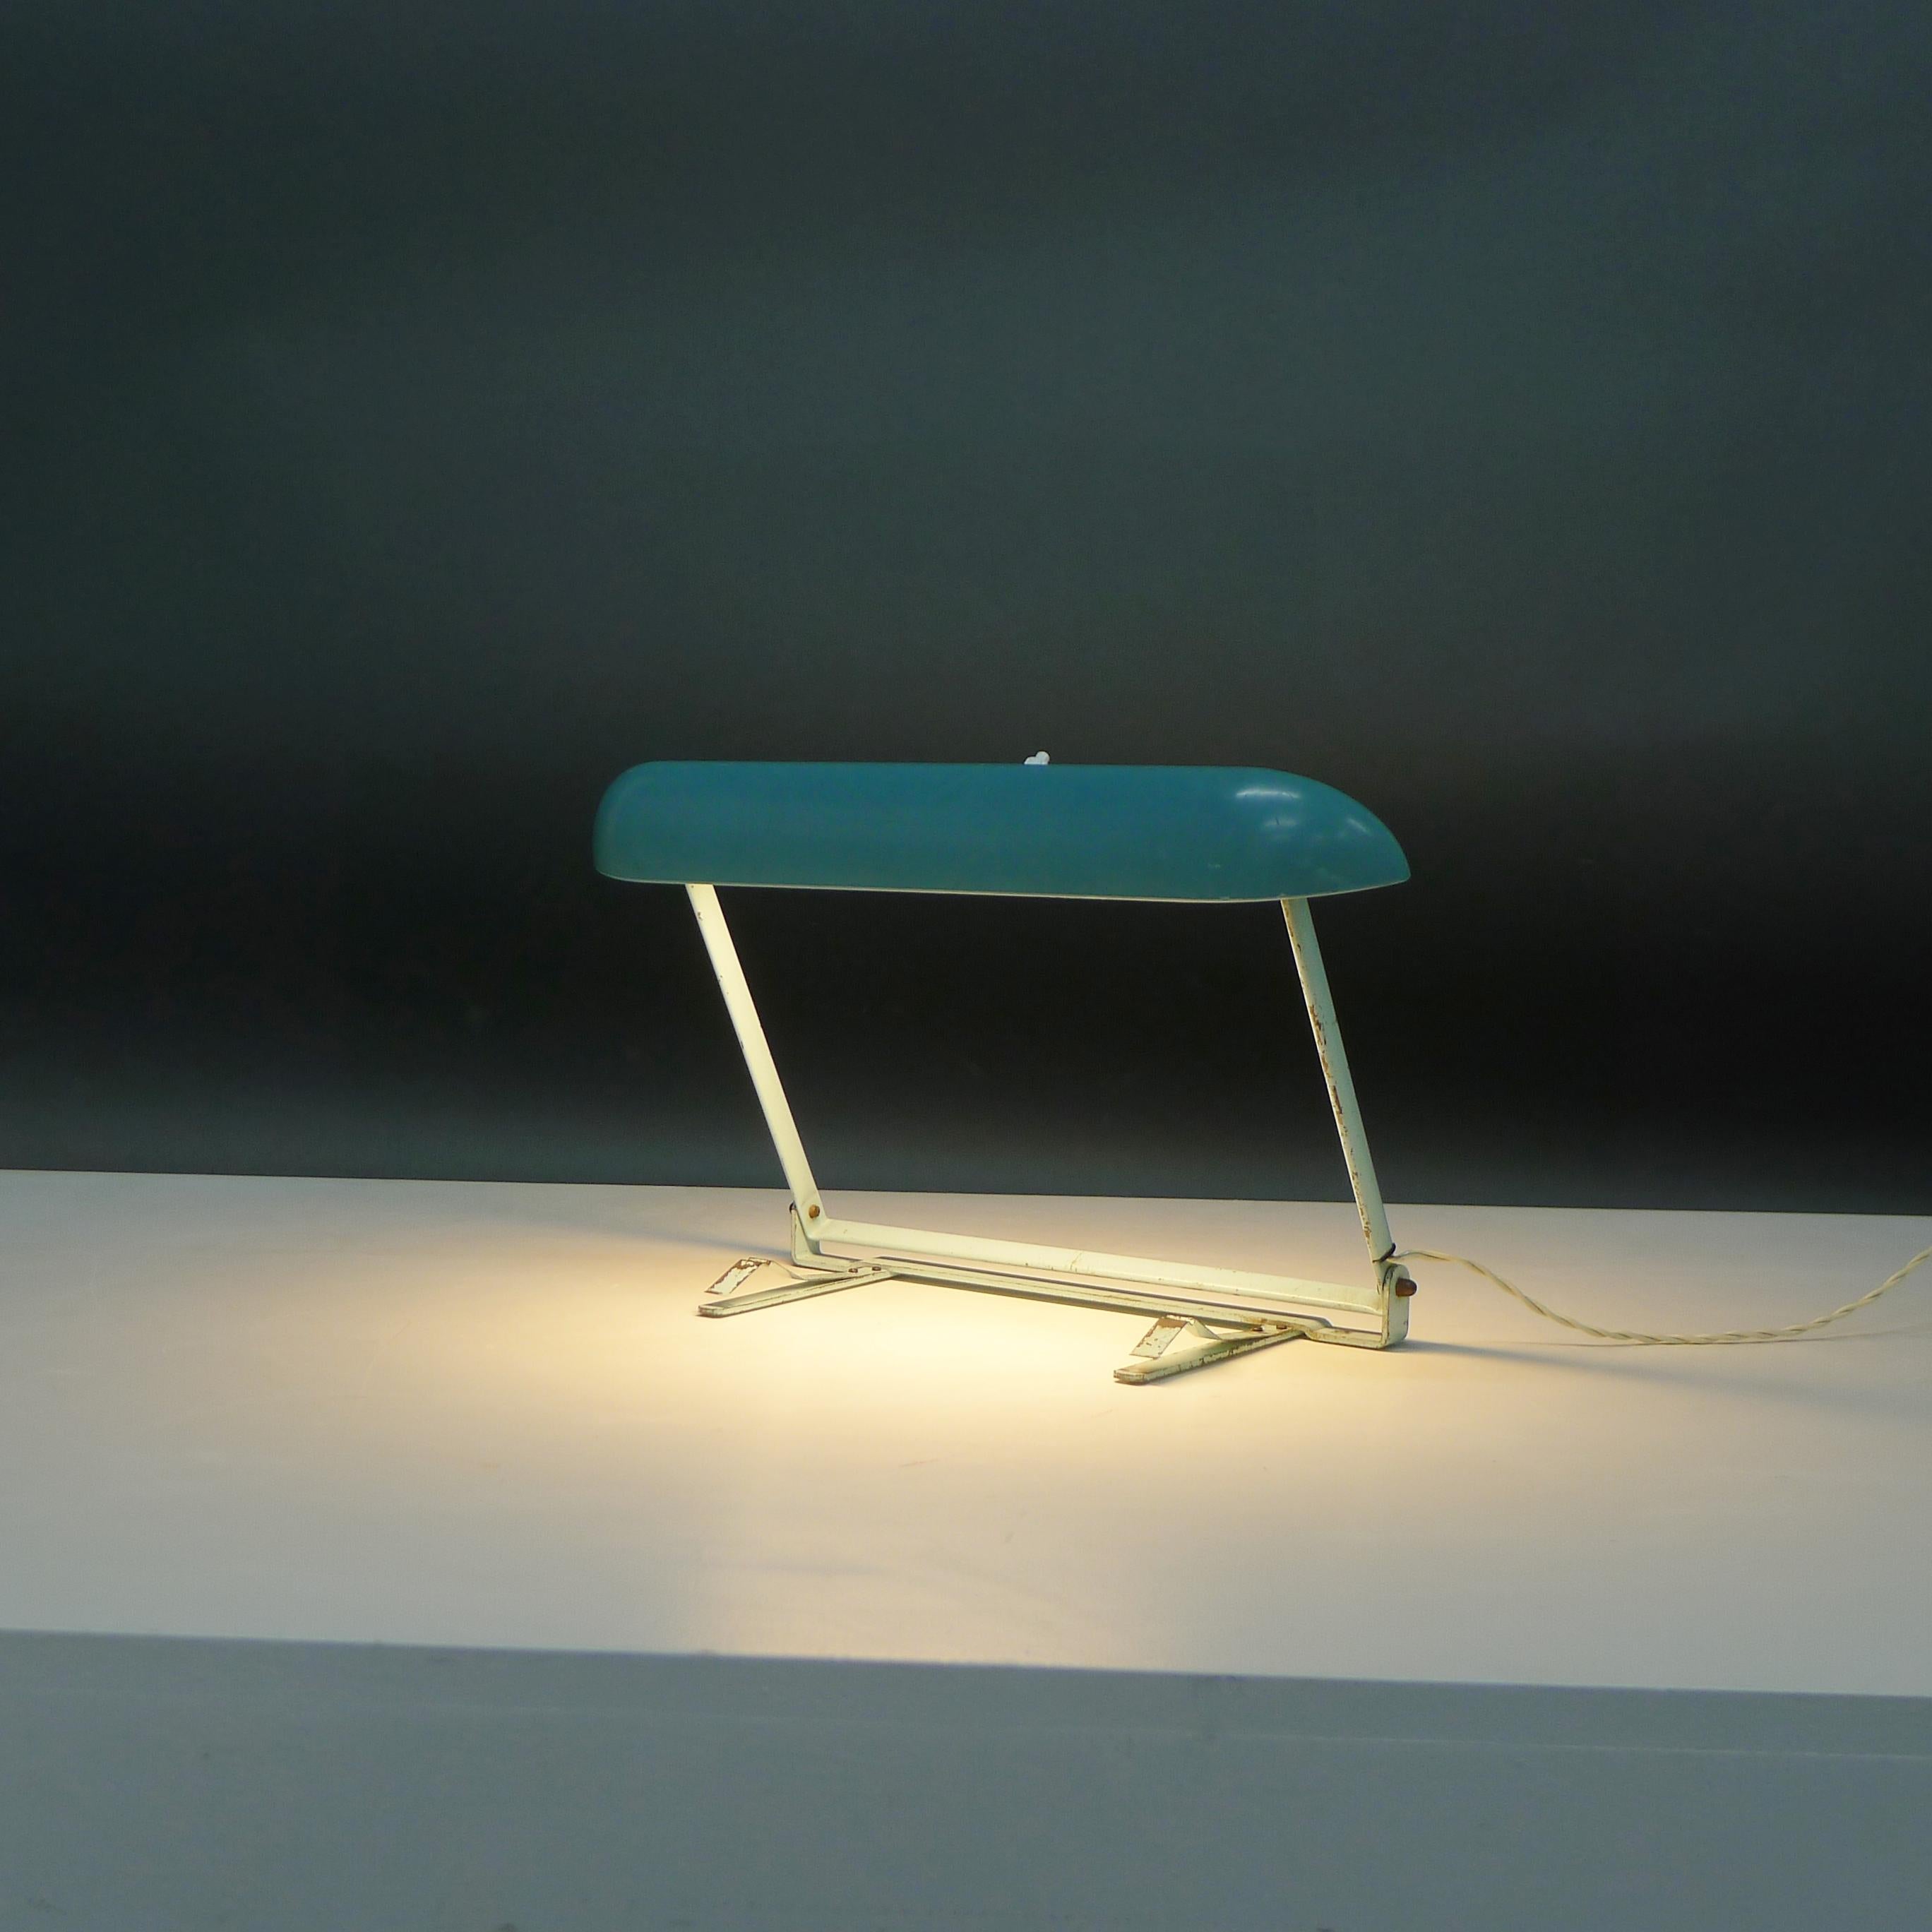 Eye-catching 1950s vintage desk light in a light turquoise colour, the design attributed to Charlotte Perriand for Philips. With curved bakelite shade over the neon strip bulb, on a lacquered metal hinged base, with clips to attach to your desk and